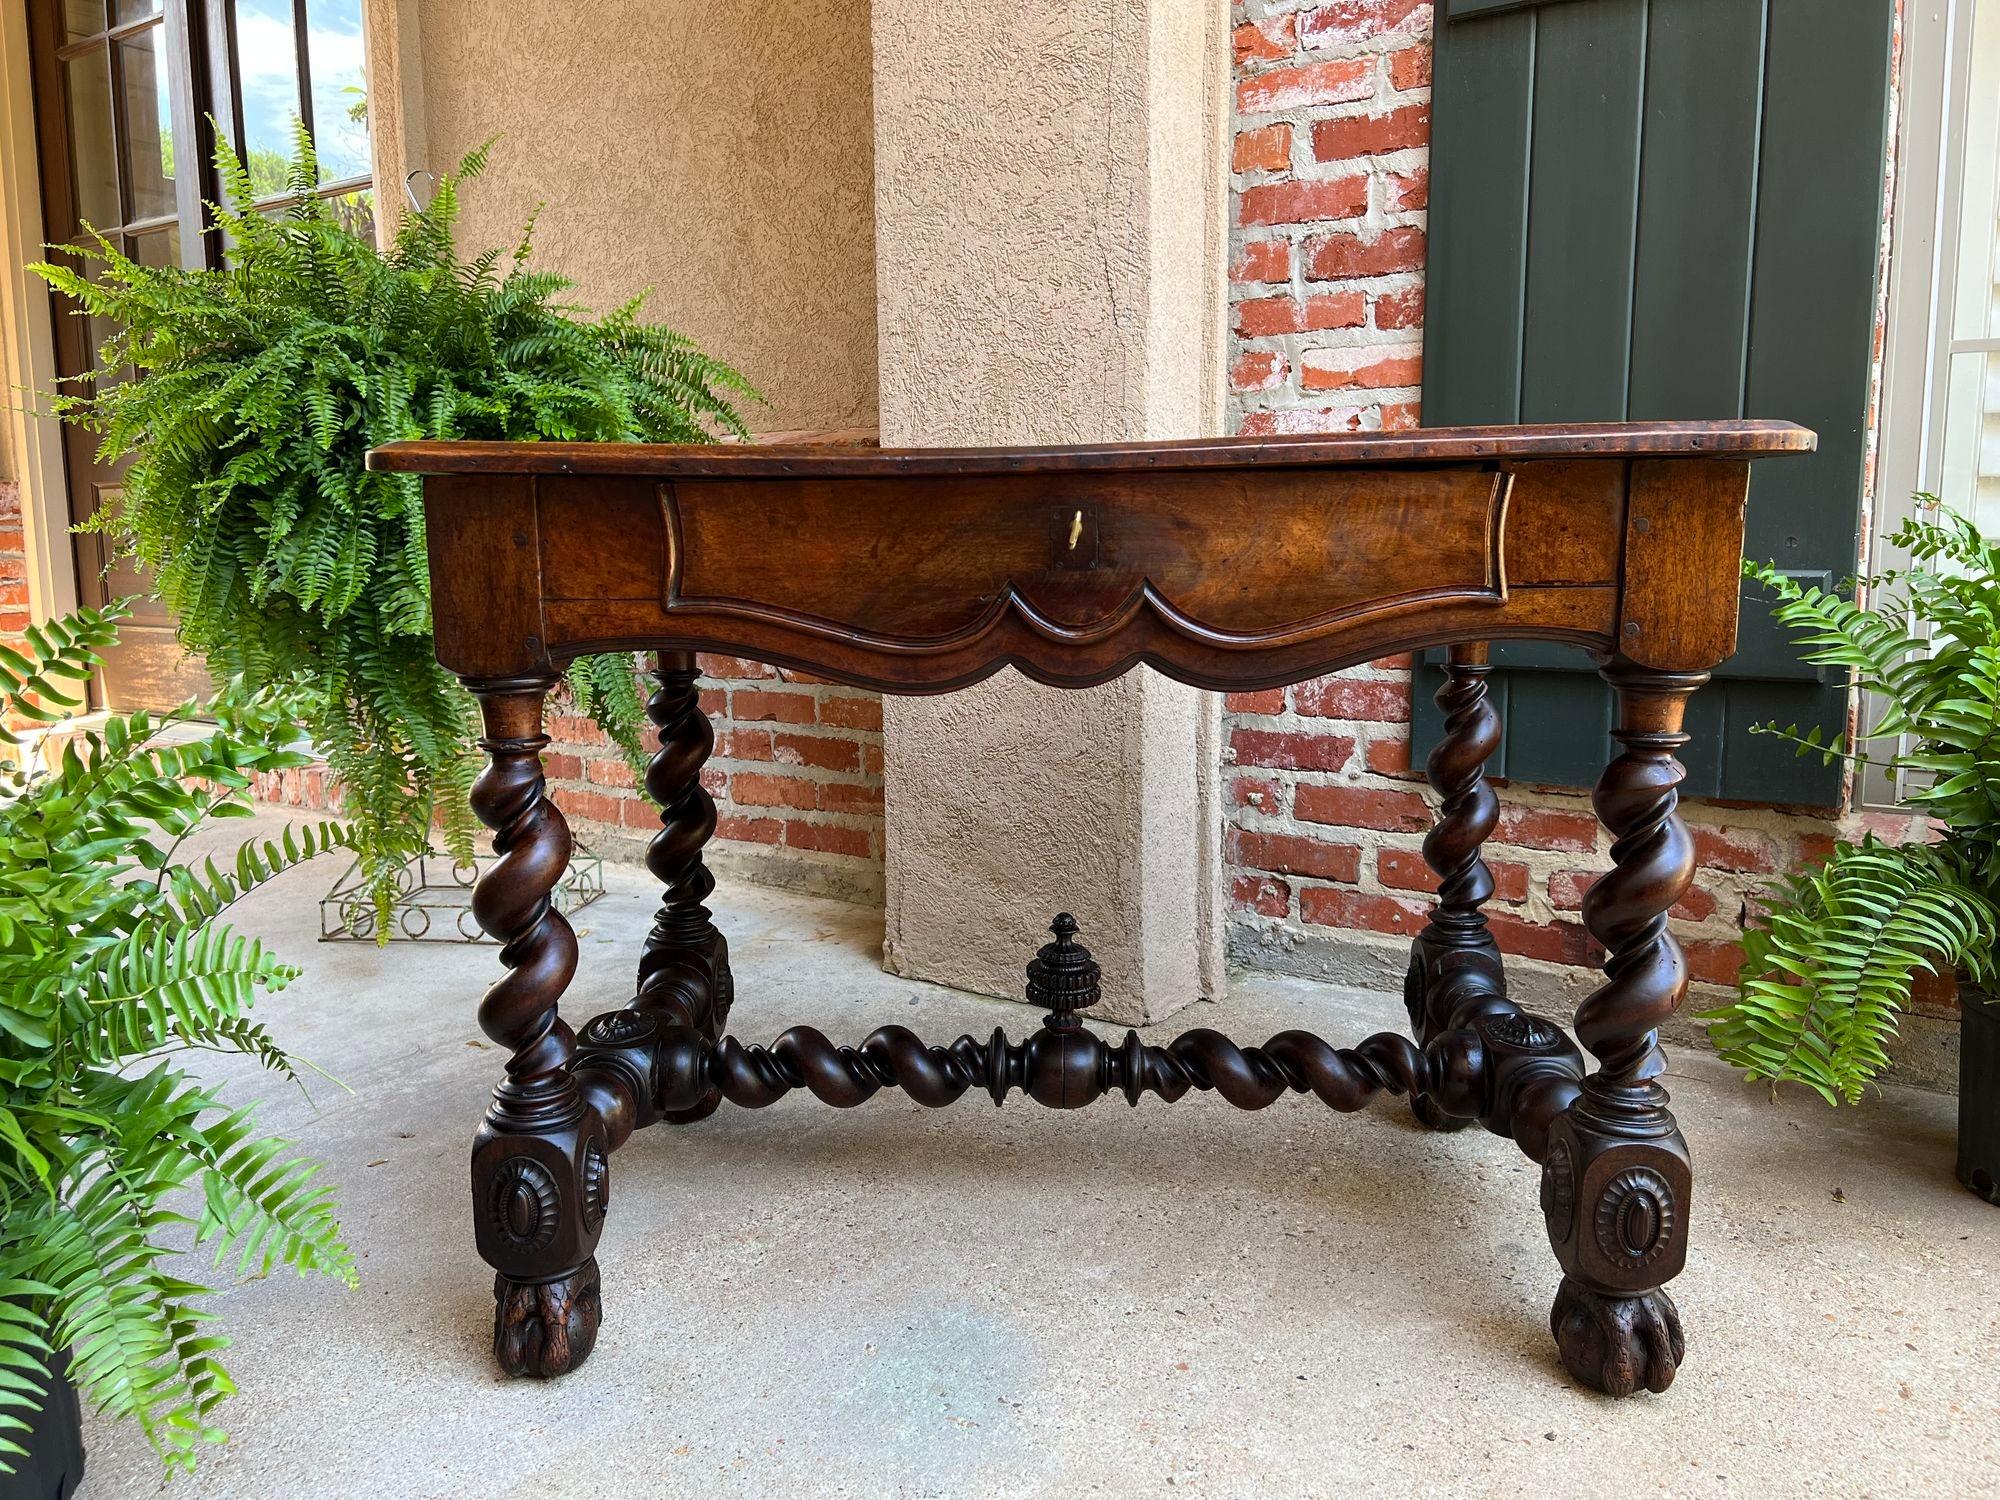 18th Century French Walnut Console Sofa Table Carved Barley Twist Desk Louis XIII.

Direct from France, an incredible antique French side/sofa table or writing desk. Stunning craftsmanship from the late 18th century, solid walnut, with superb hand